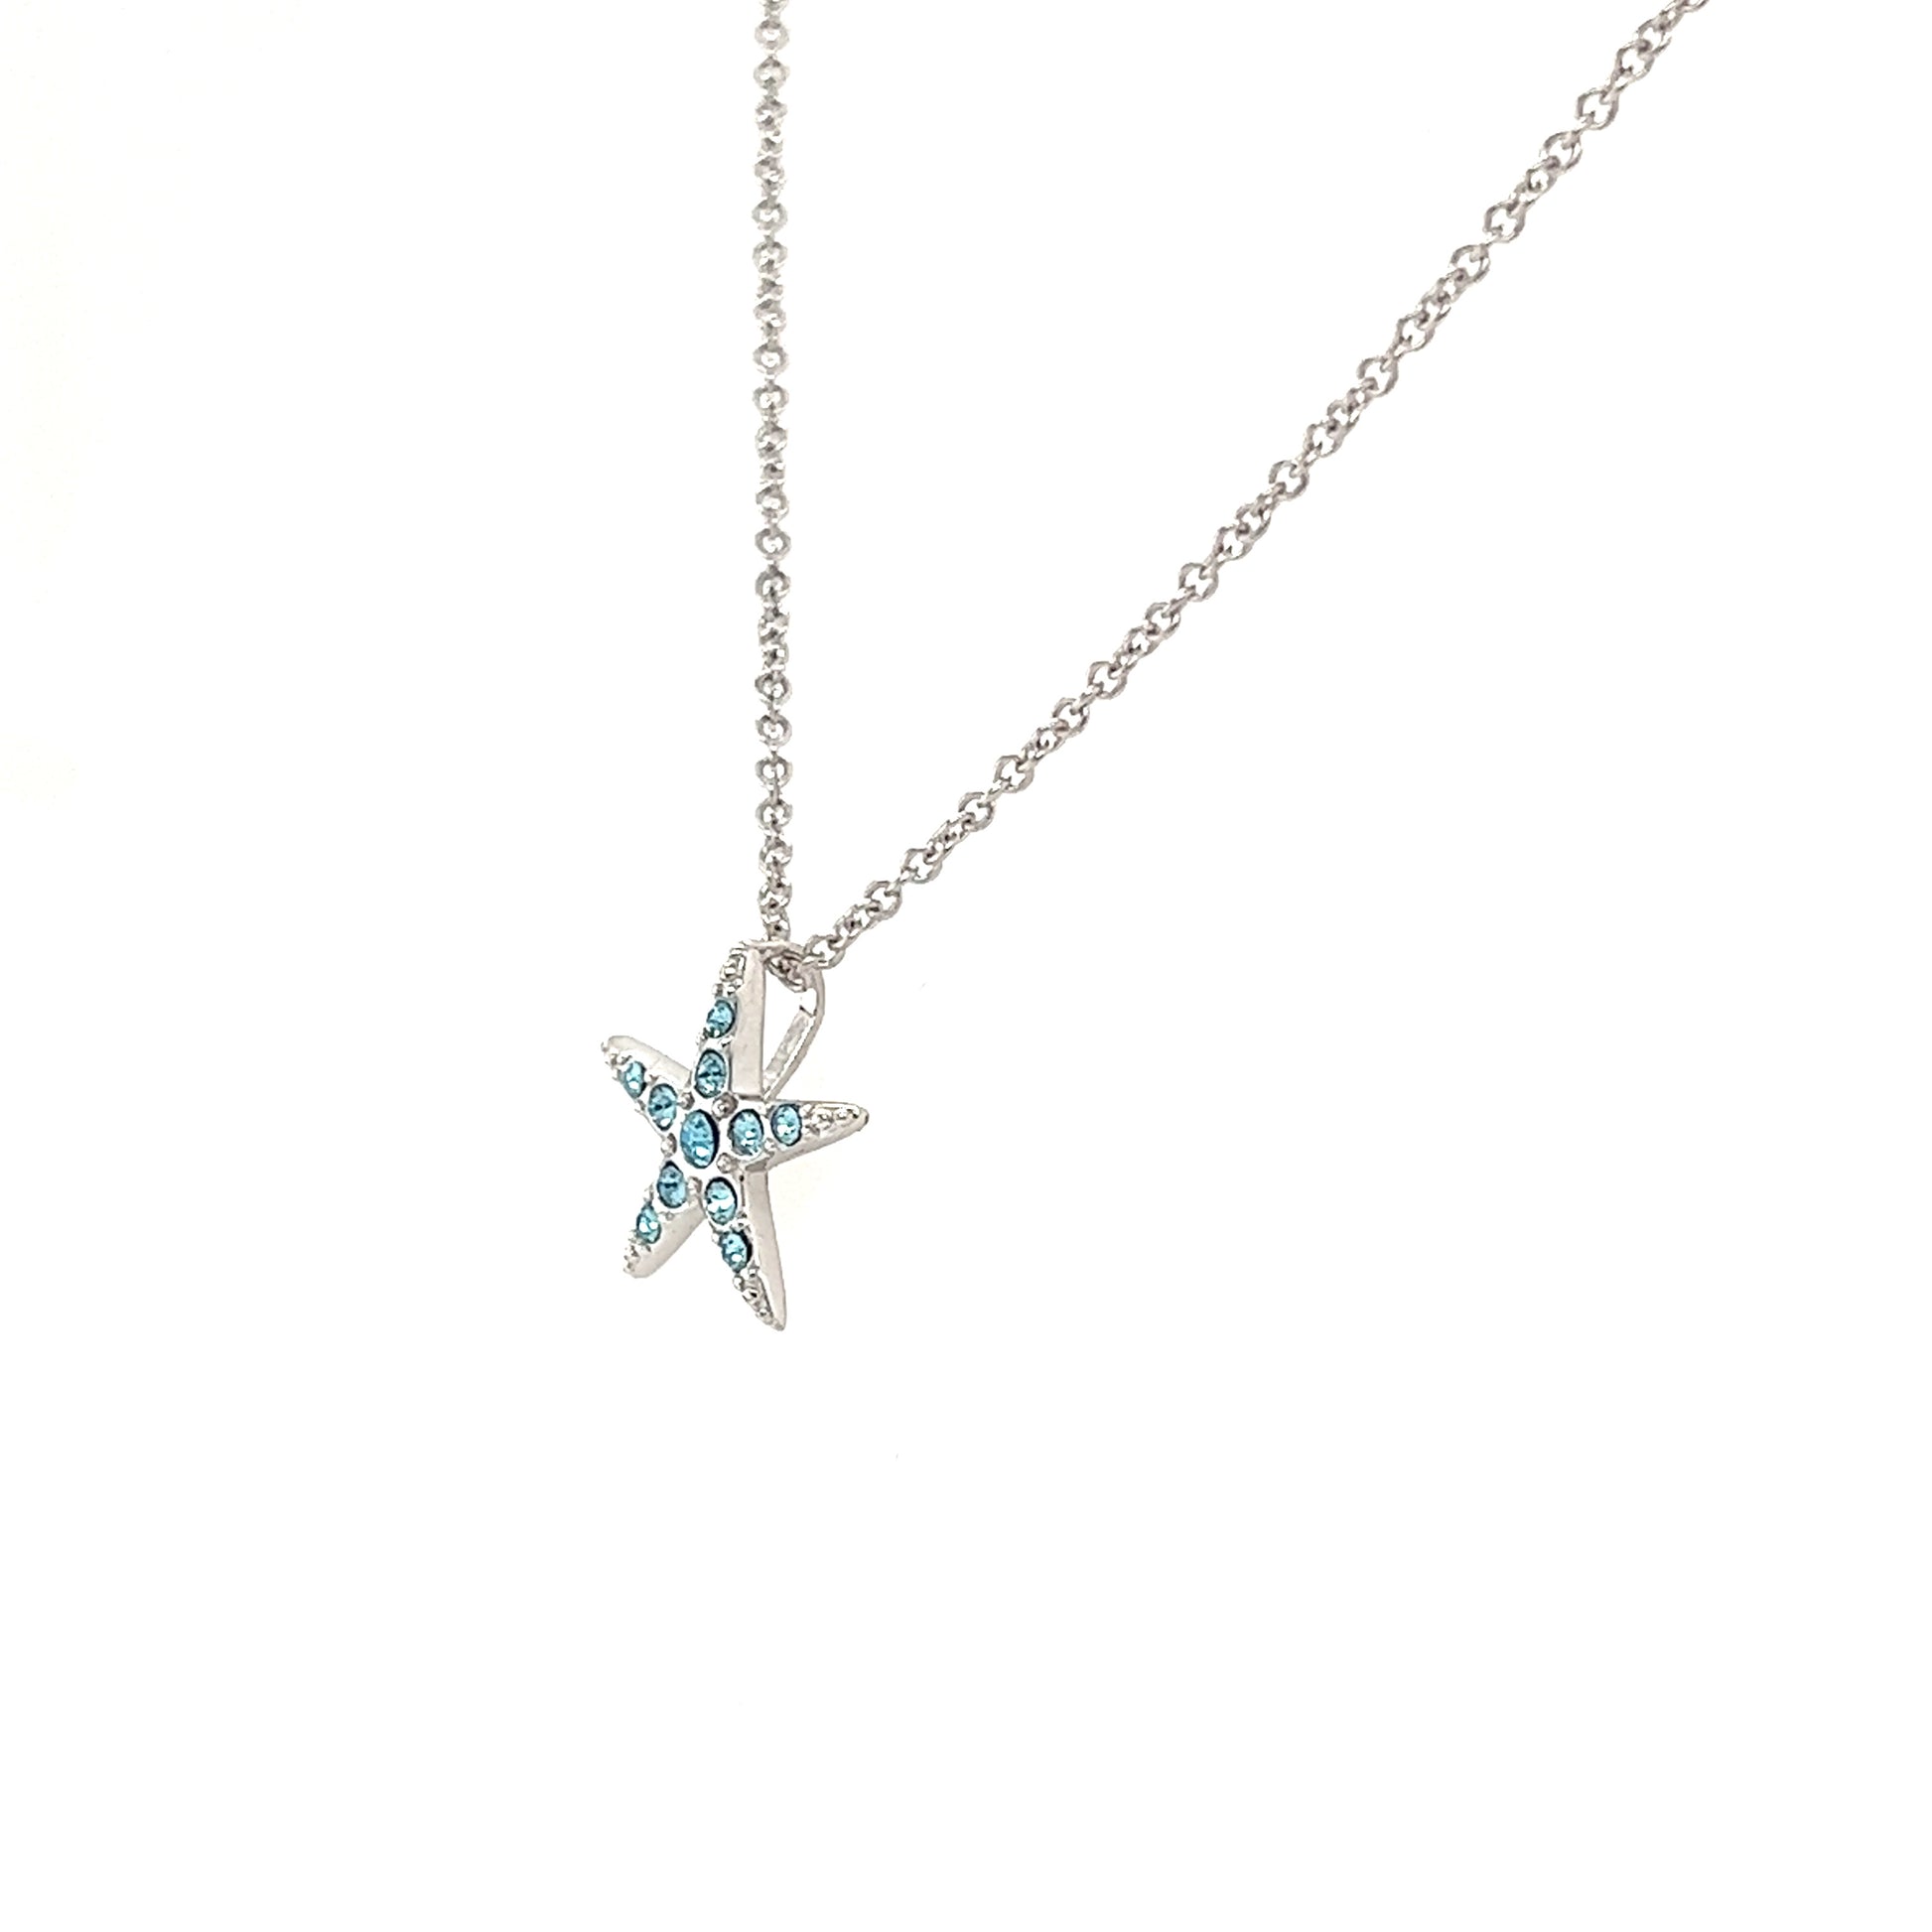 Small Starfish Necklace with Aqua Crystals in Sterling Silver Left Side View